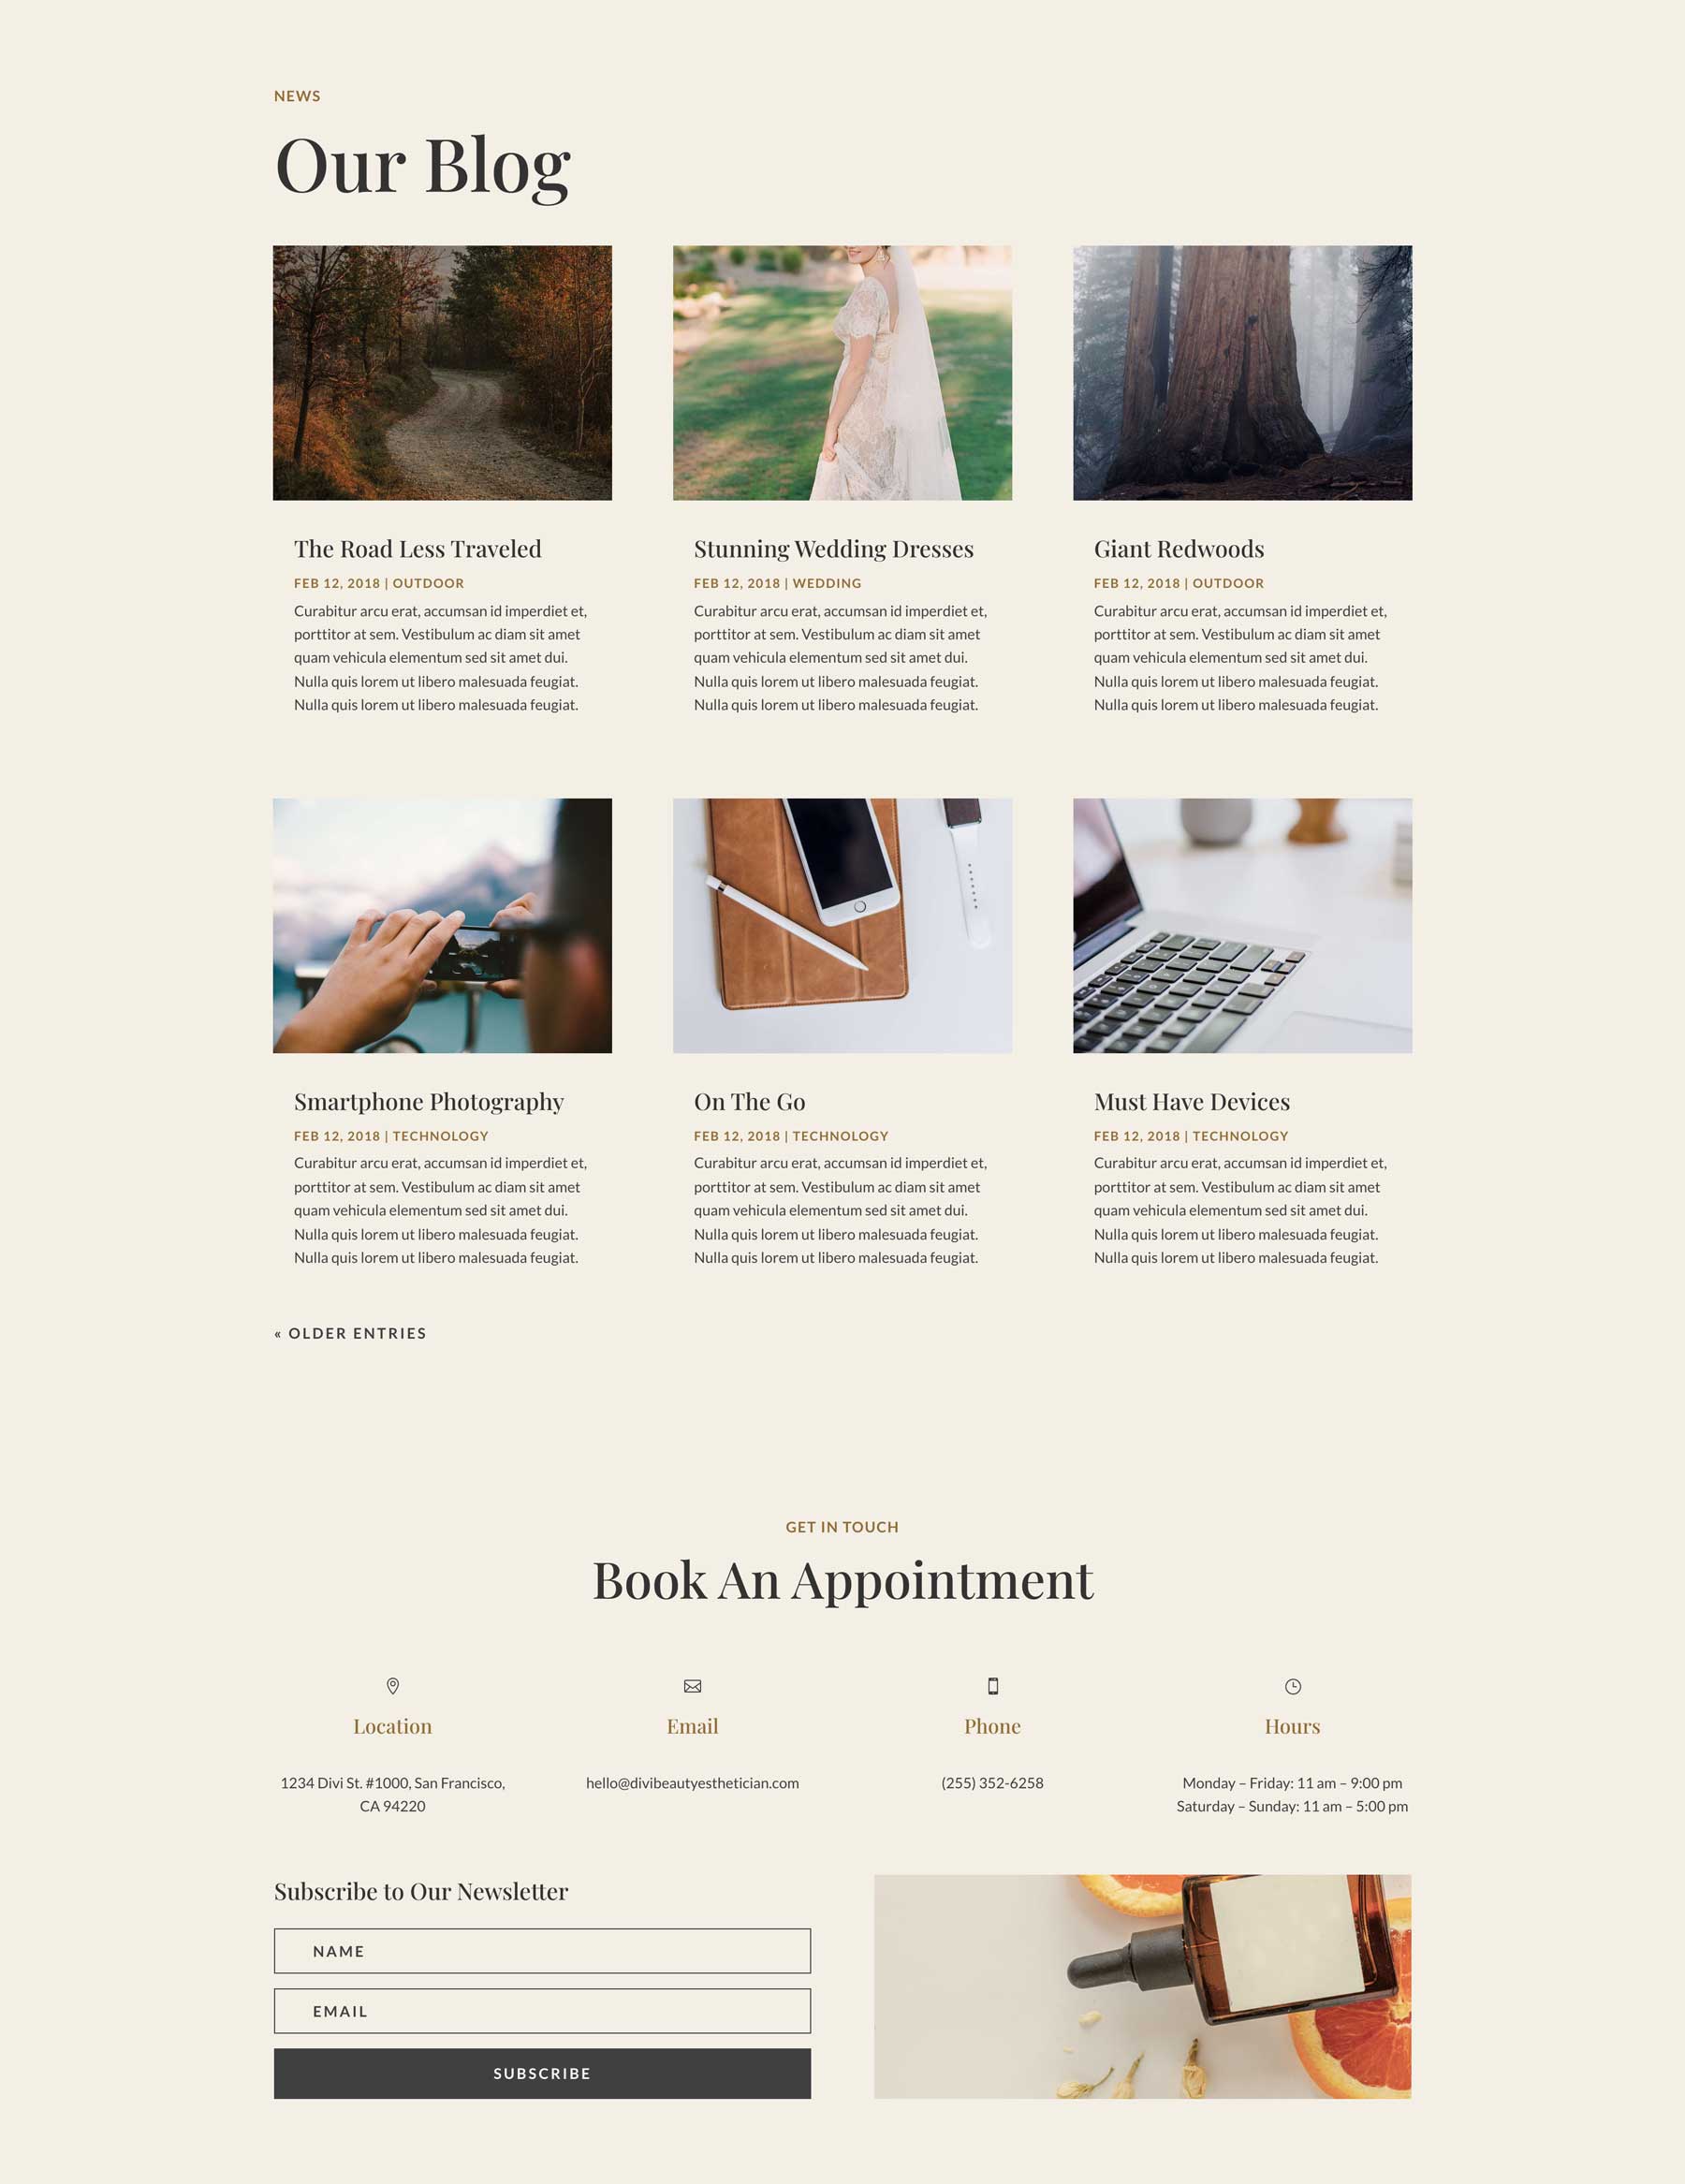 Esthetician Layout Pack for Divi